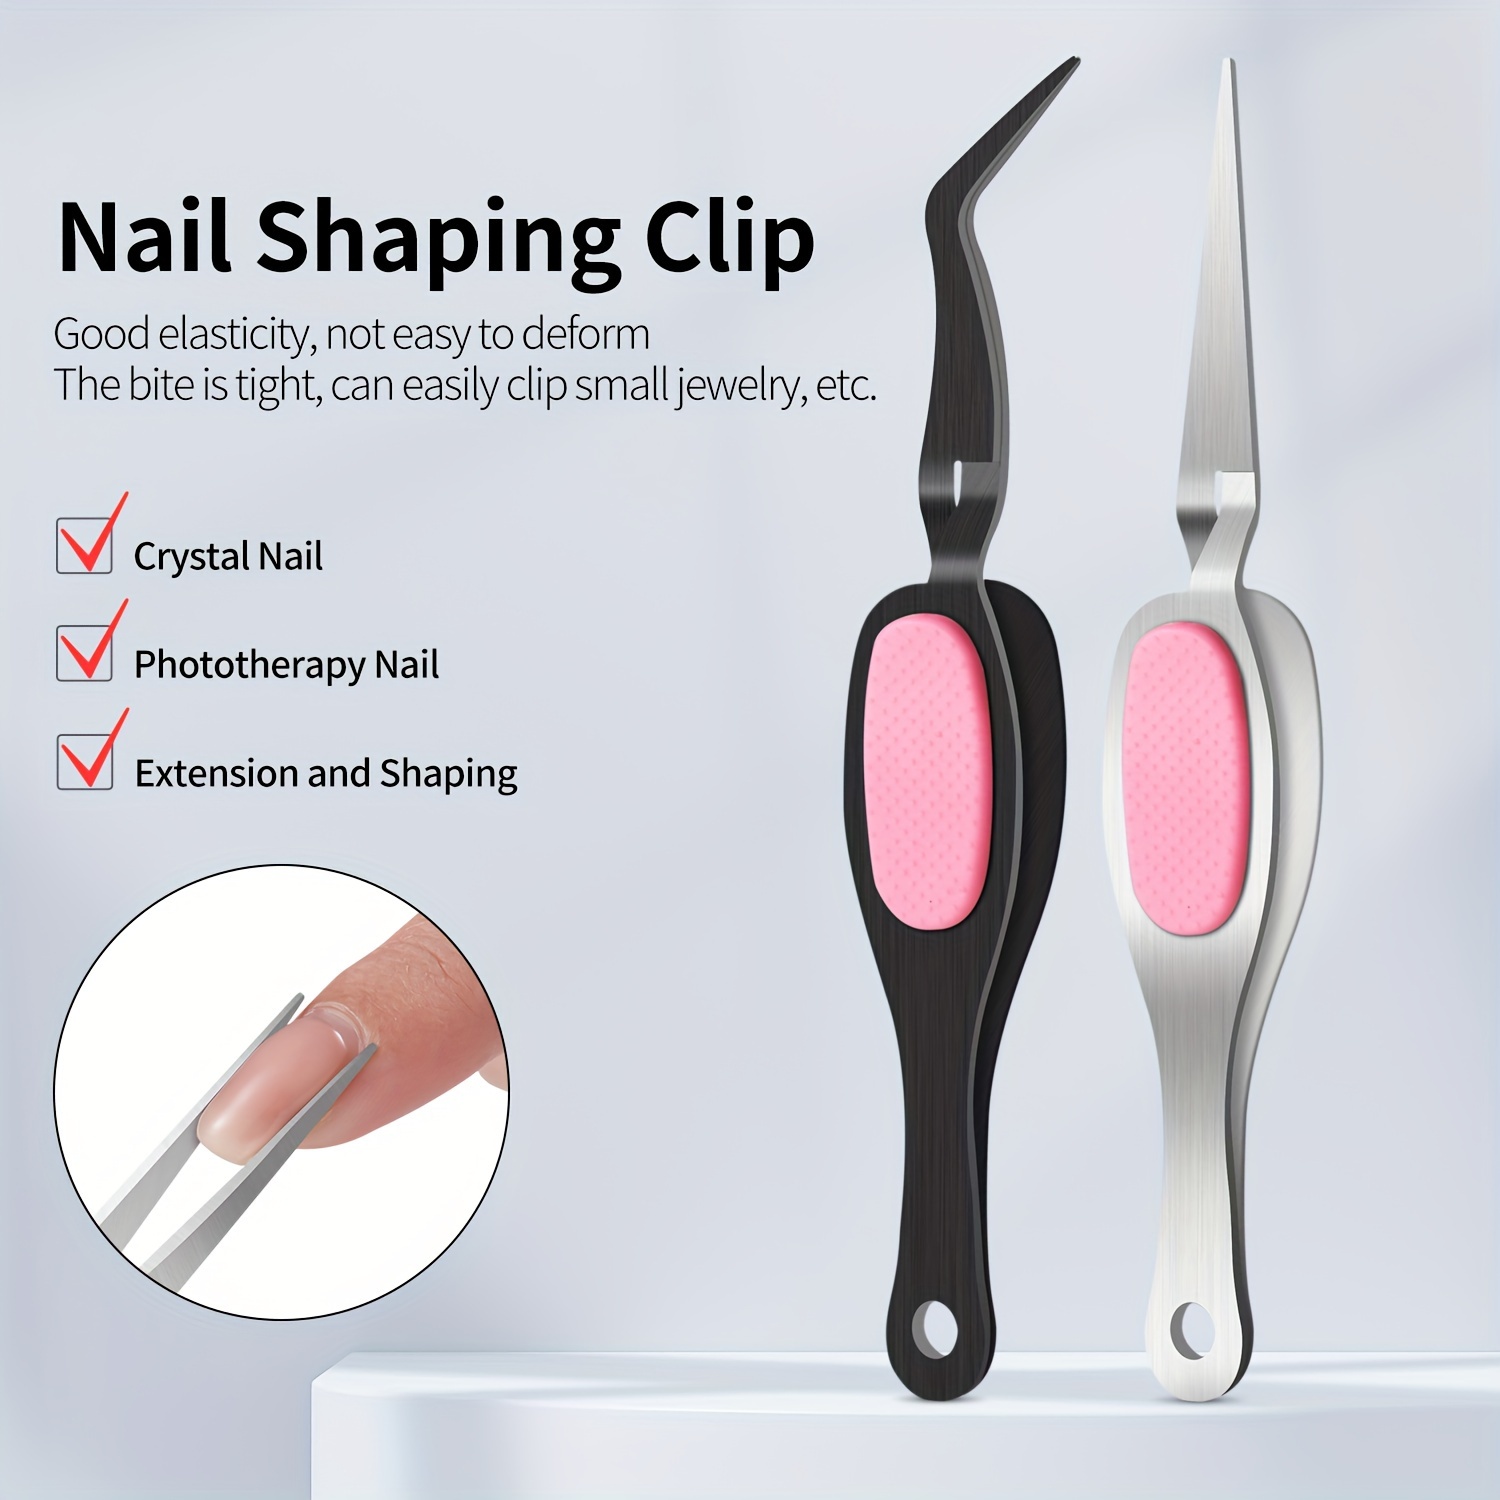 

Stainless Steel Nail Shaping Tweezers - Curved & Straight Tips For Precision Manicure, Crystal Phototherapy Extension Tool